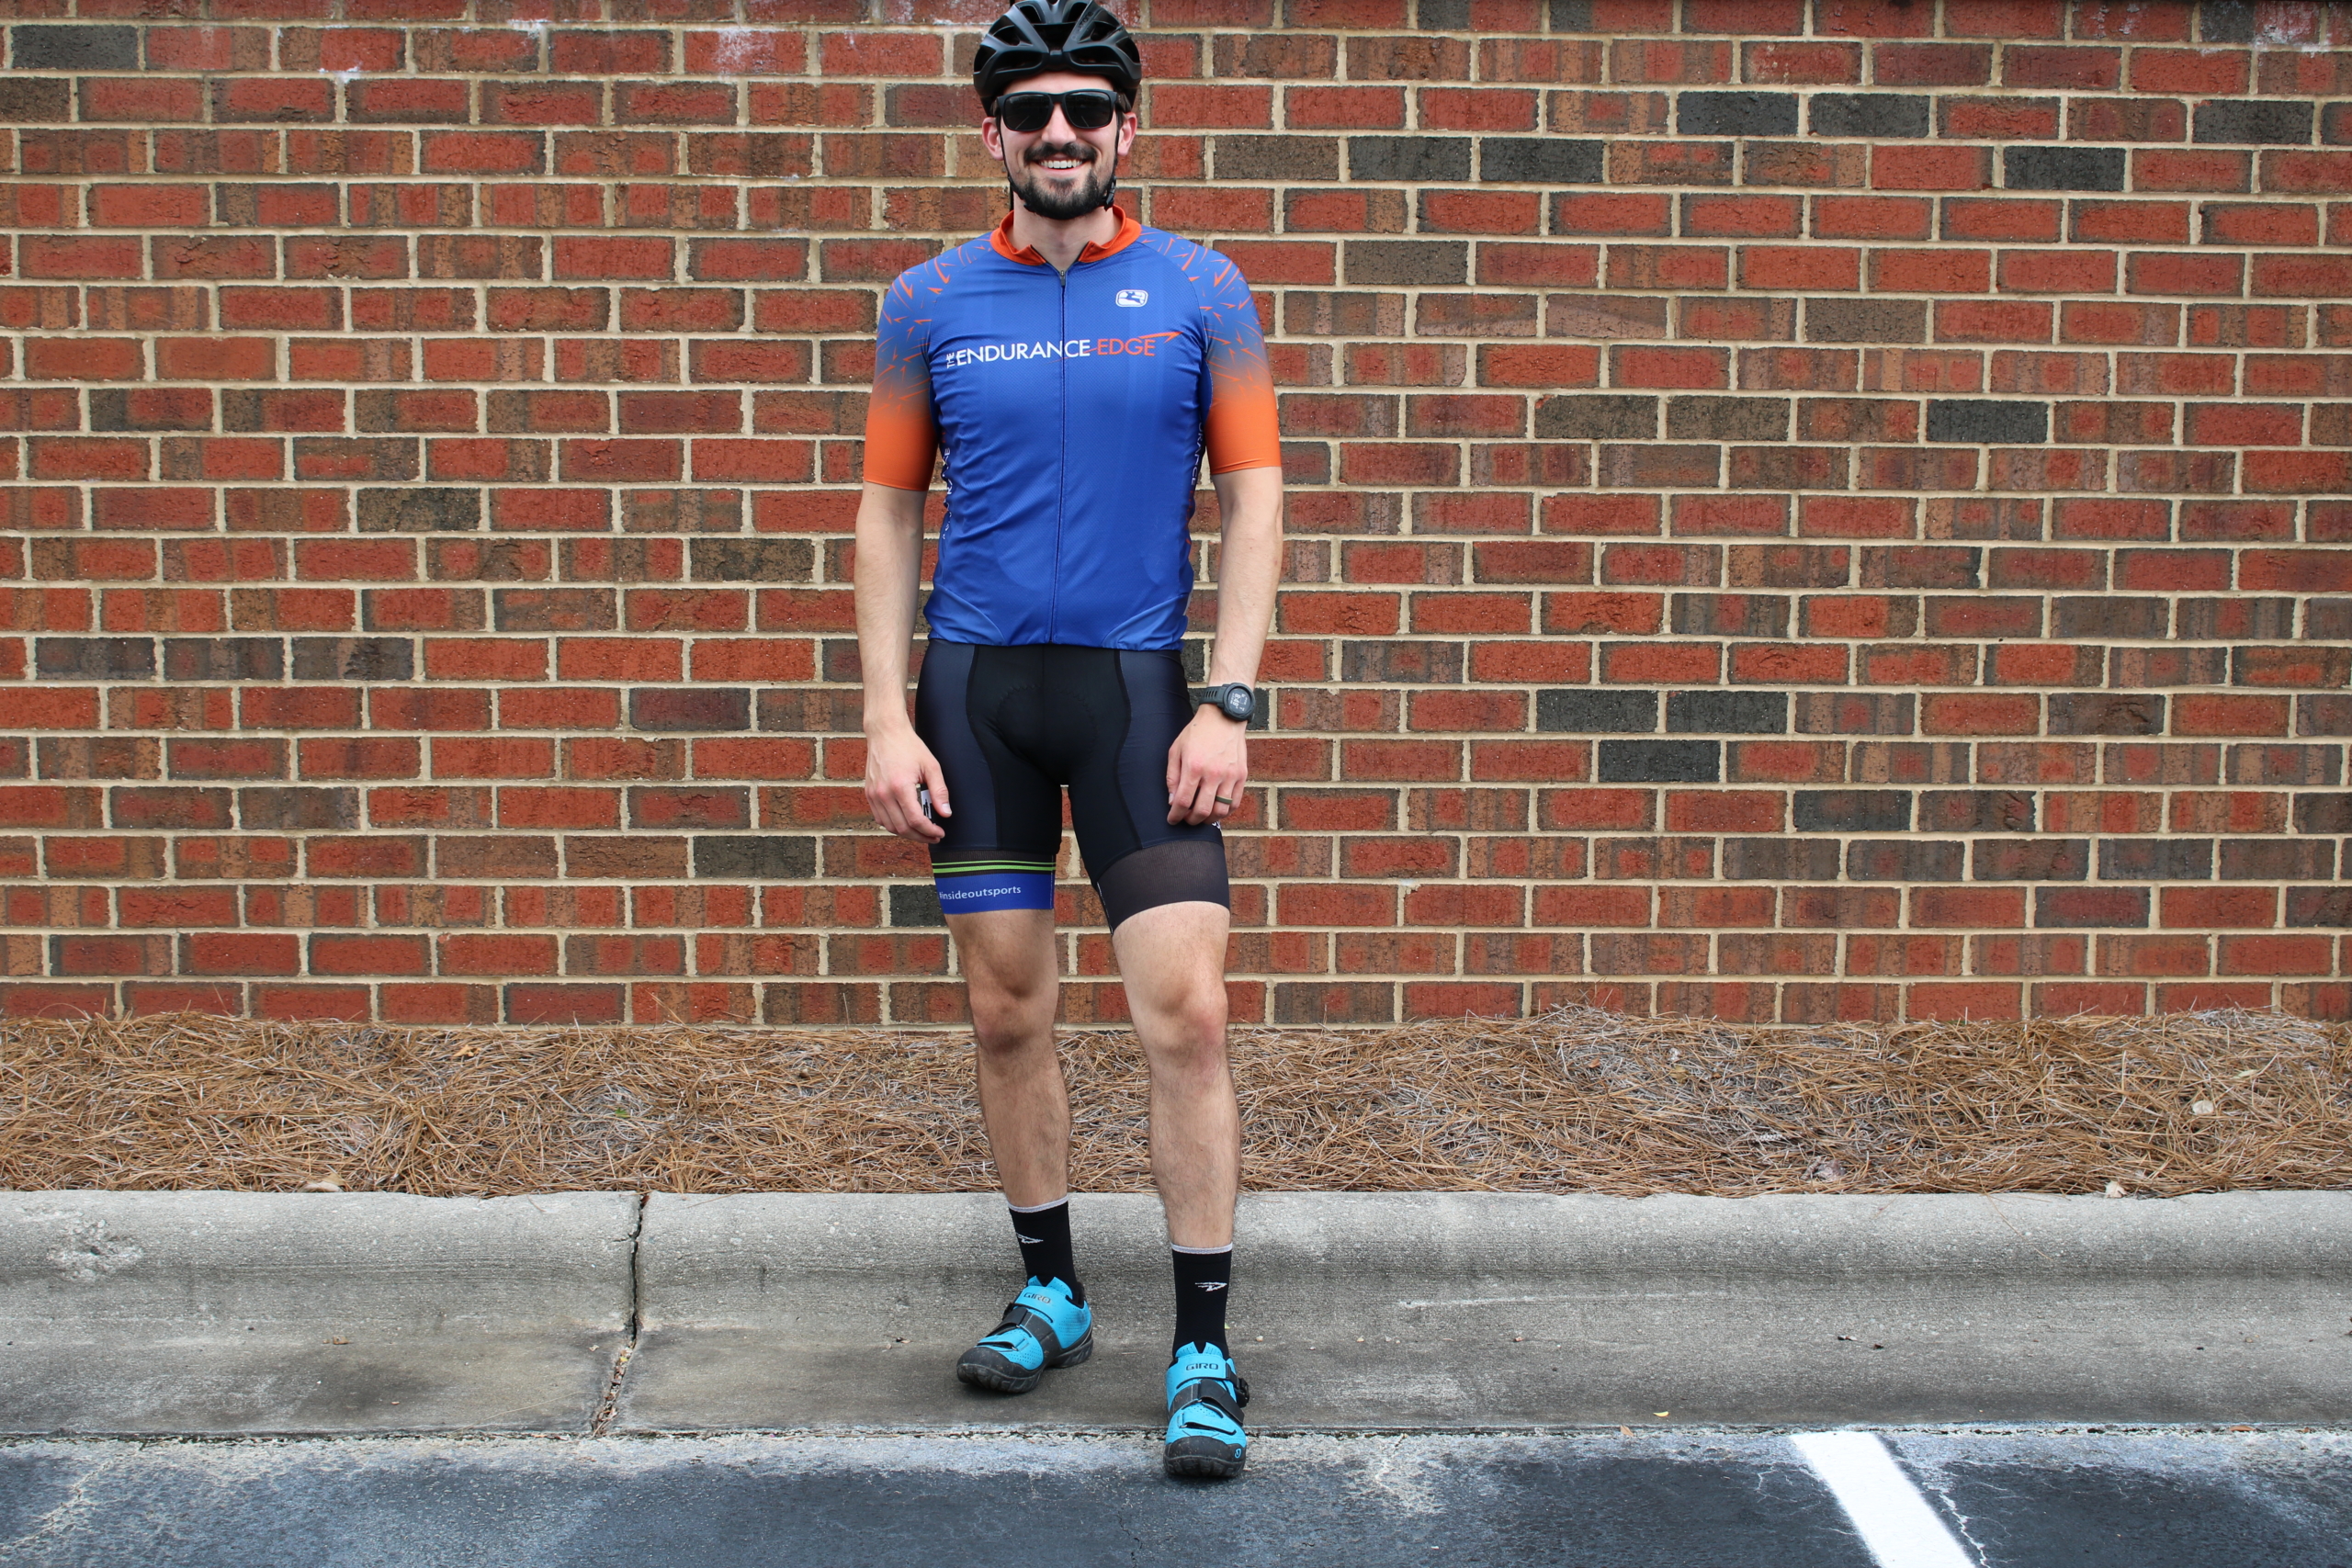 tit Sind hule The Endurance Edge Women's Cycling Jersey - The Endurance Edge: Coaching,  Nutrition & Metabolic Testing in Cary, NC